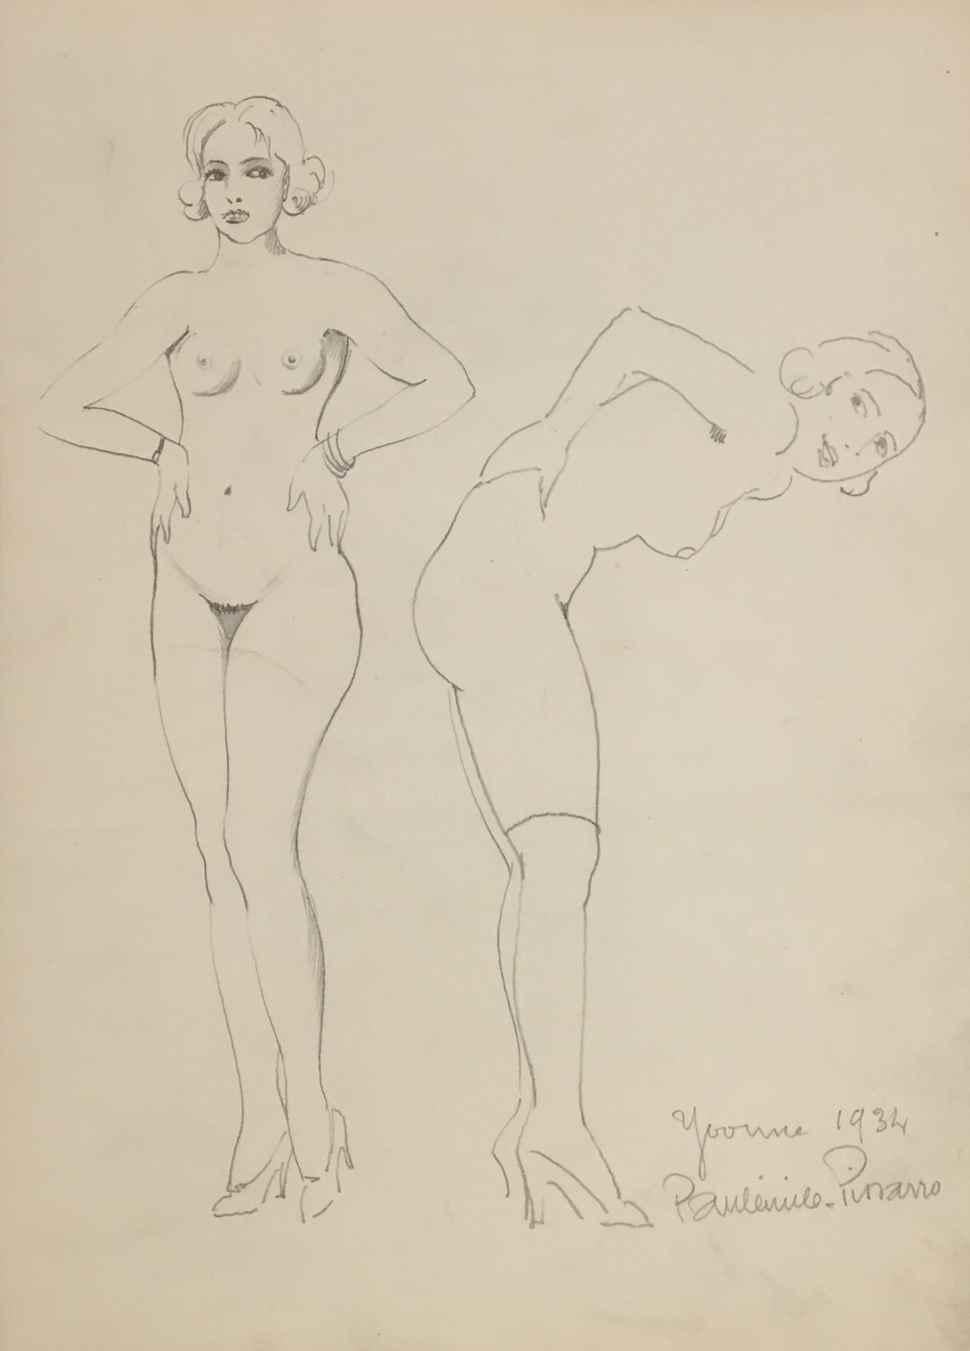 SOLD UNFRAMED 

Yvonne Posant by Paulémile Pissarro (1884 - 1972)
Graphite on paper
32 x 23.5 cm (12 ⁵/₈ x 9 ¹/₄ inches)
Signed lower right, Paulémile-Pissarro-, and titled lower right
Executed in 1934

Provenance
Estate of the Artist
Yvonne